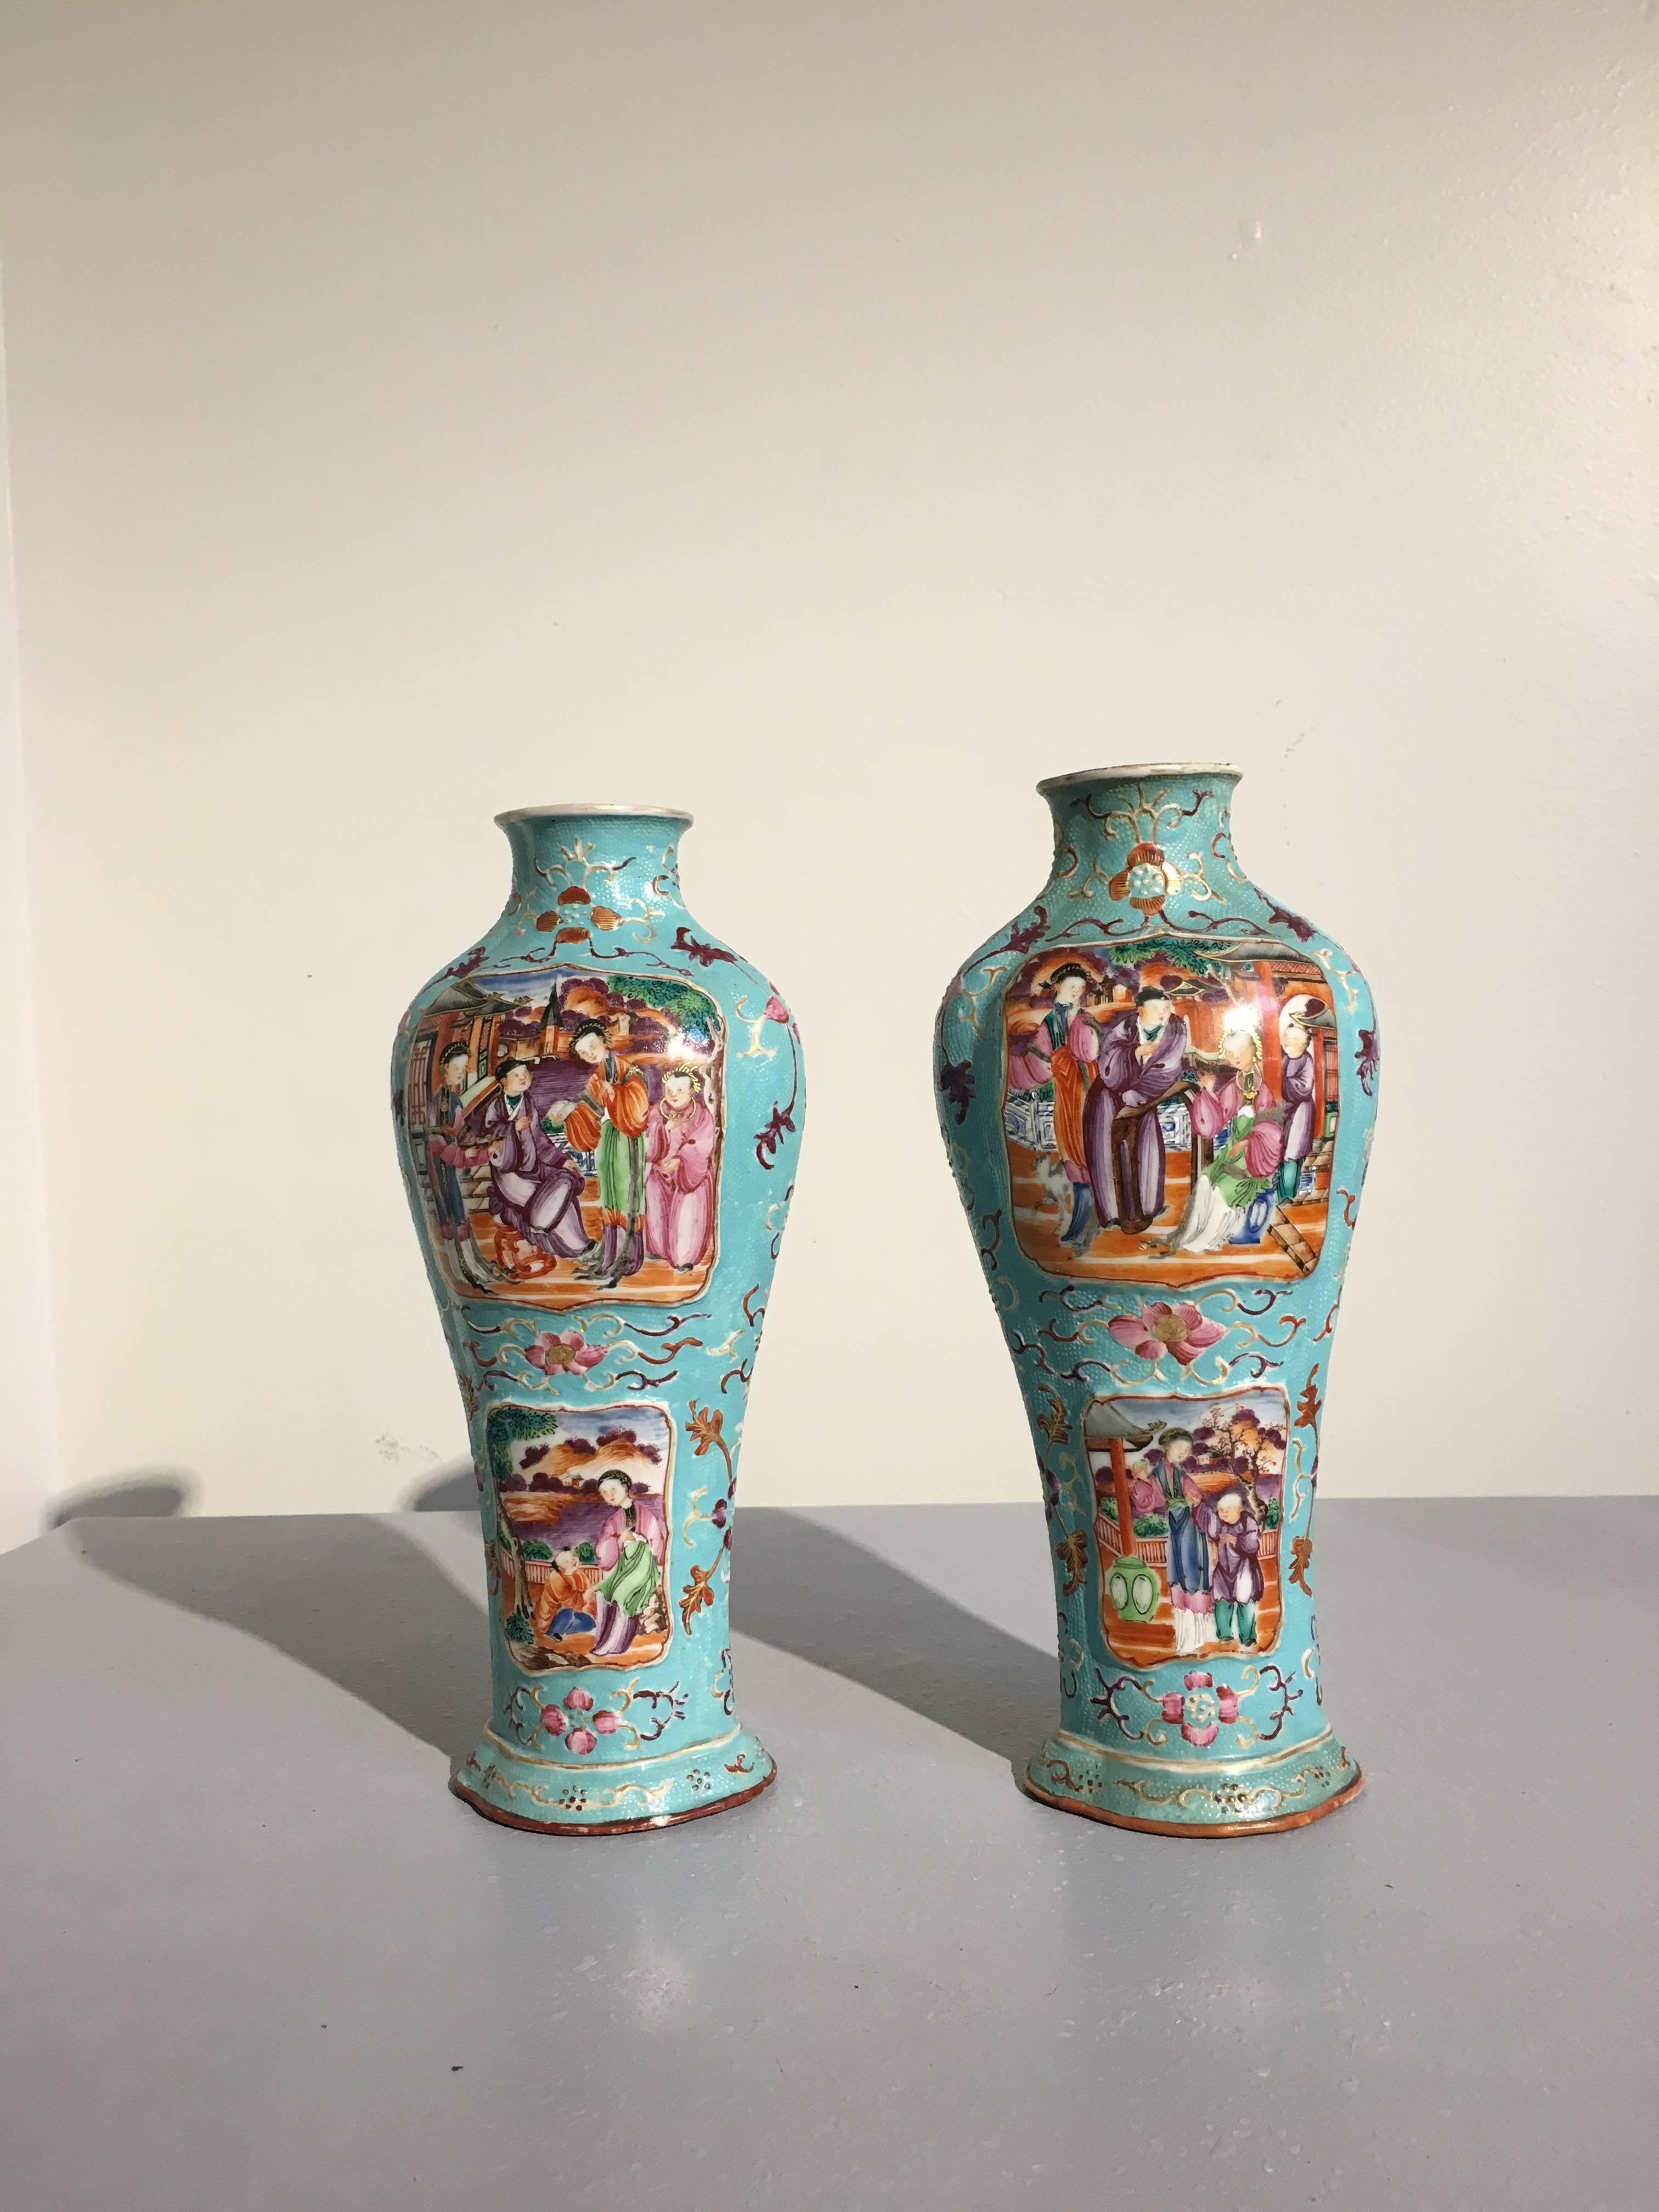 A fine pair of Chinese export quatrefoil vases decorated in the Mandarin palette upon an attractive turquoise 